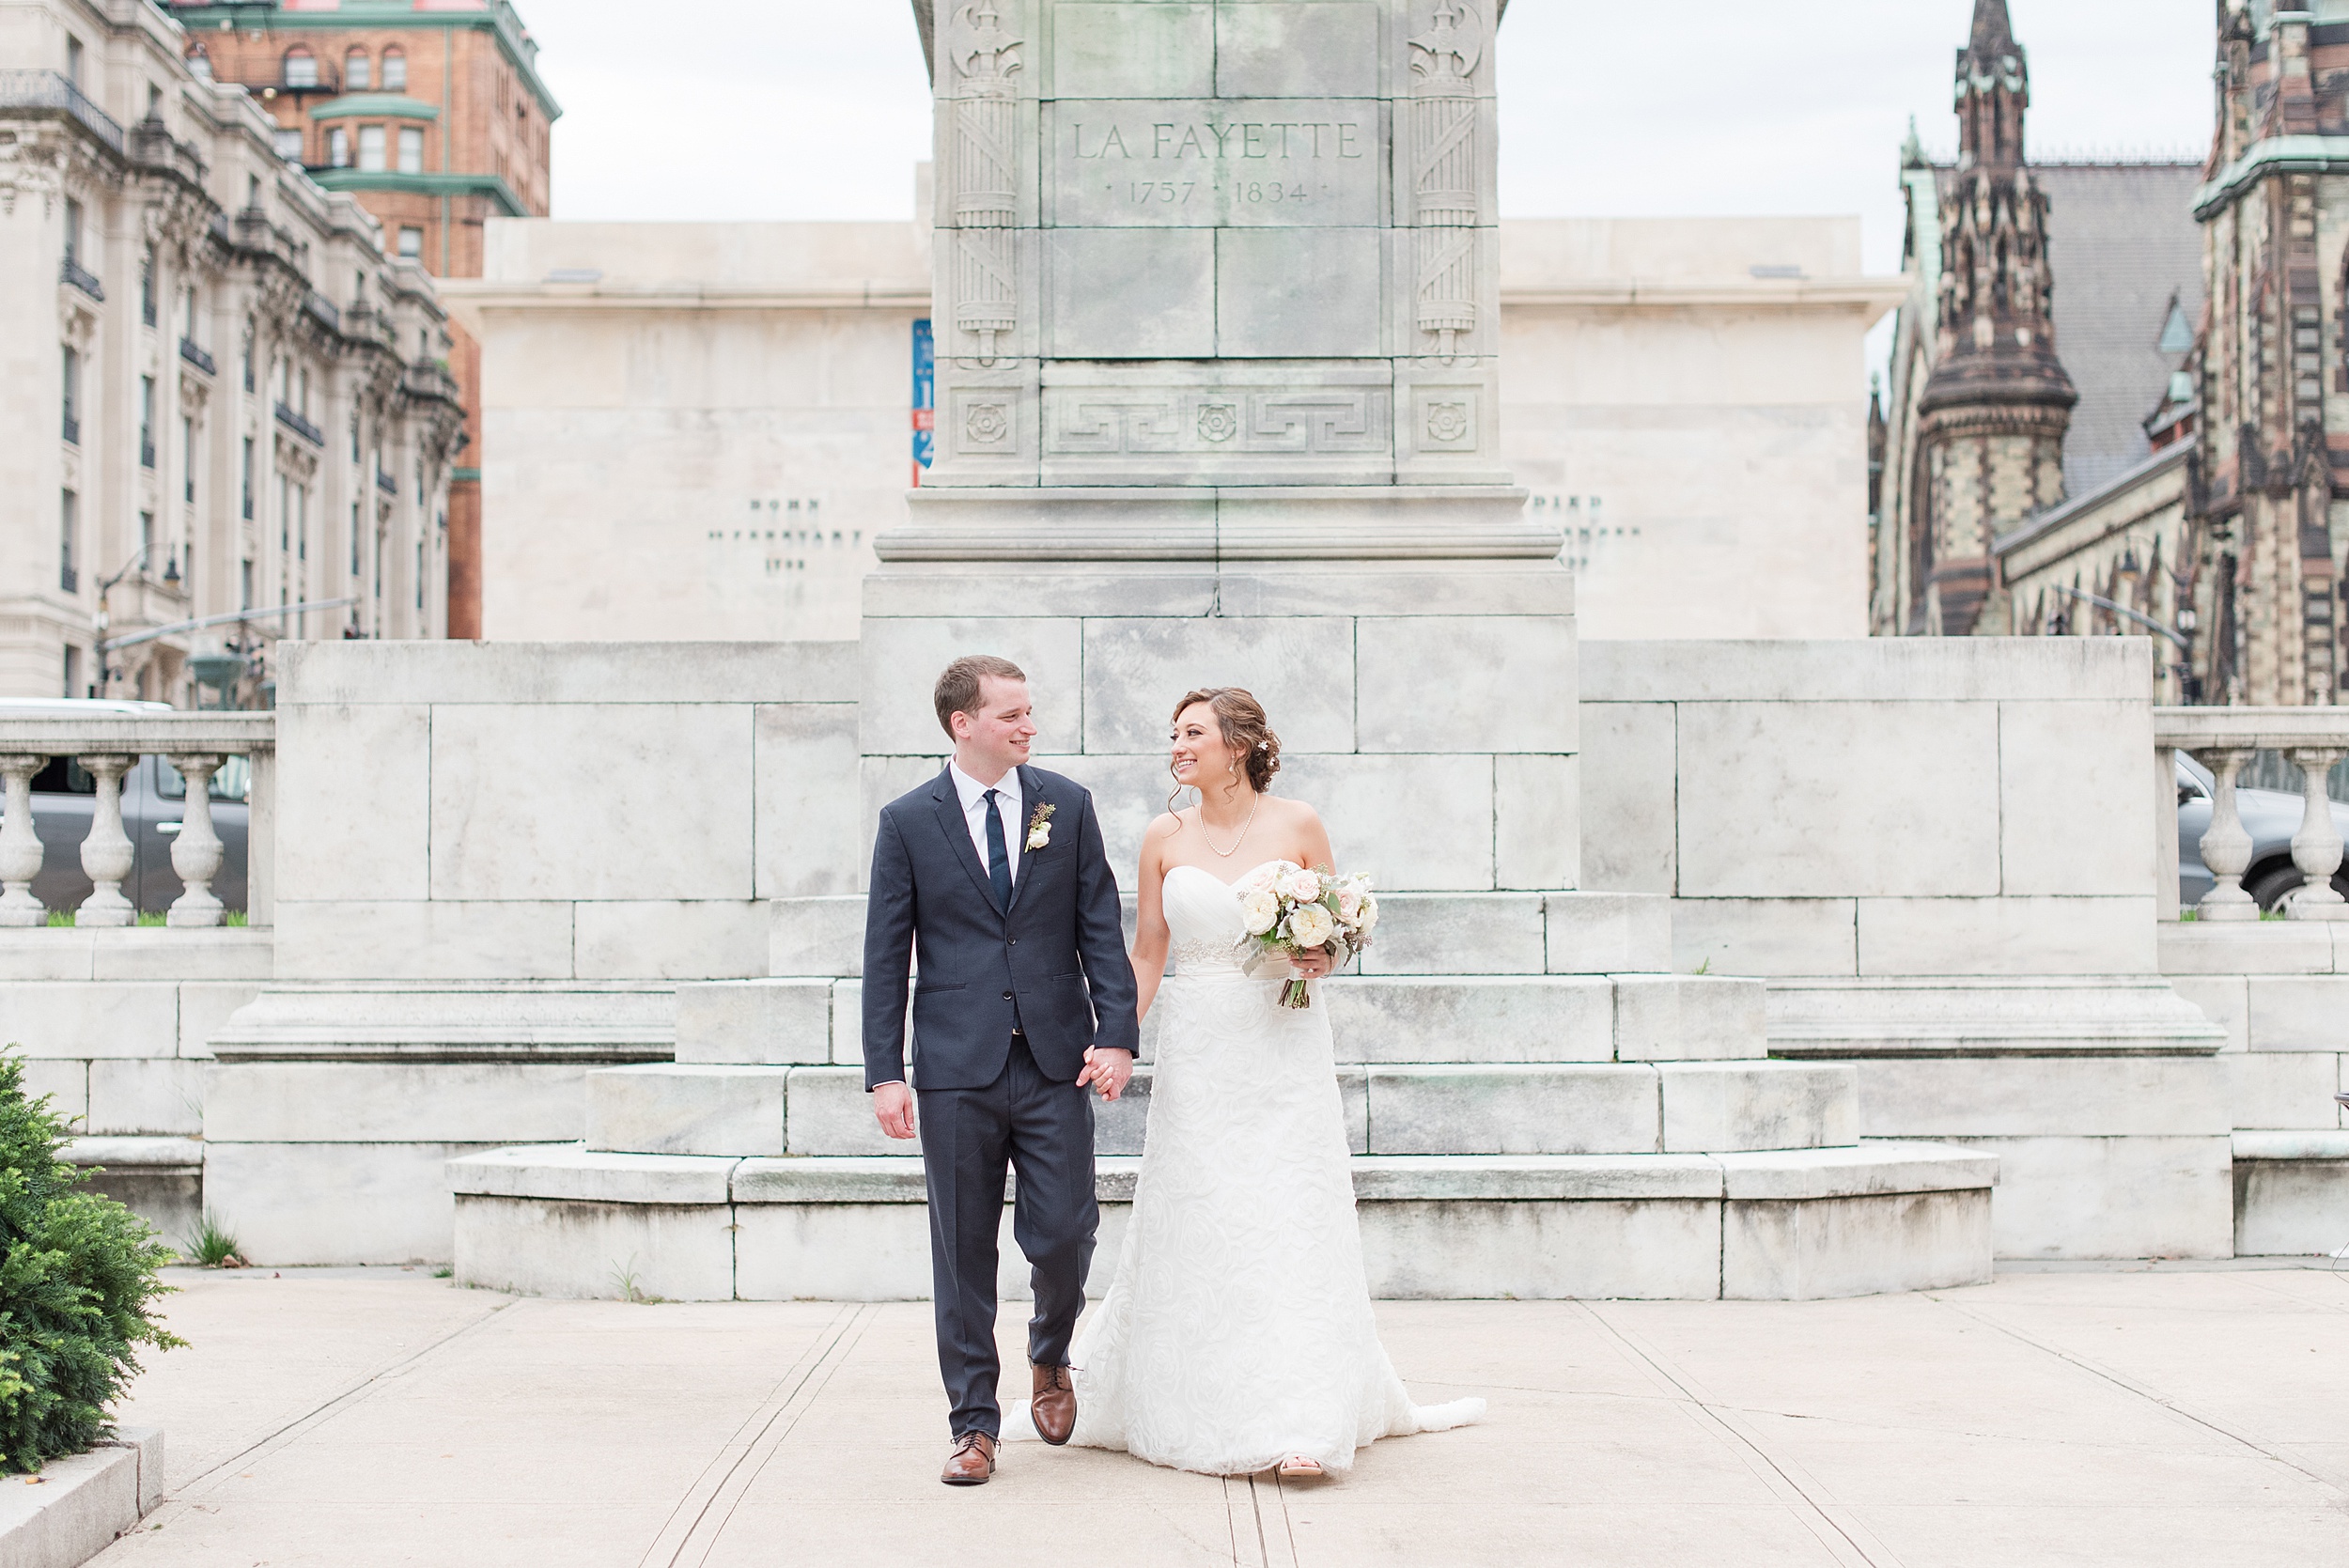 Newlyweds hold hands while walking by the Lafayette memorial to one of the fabulous Wedding Venues In Maryland